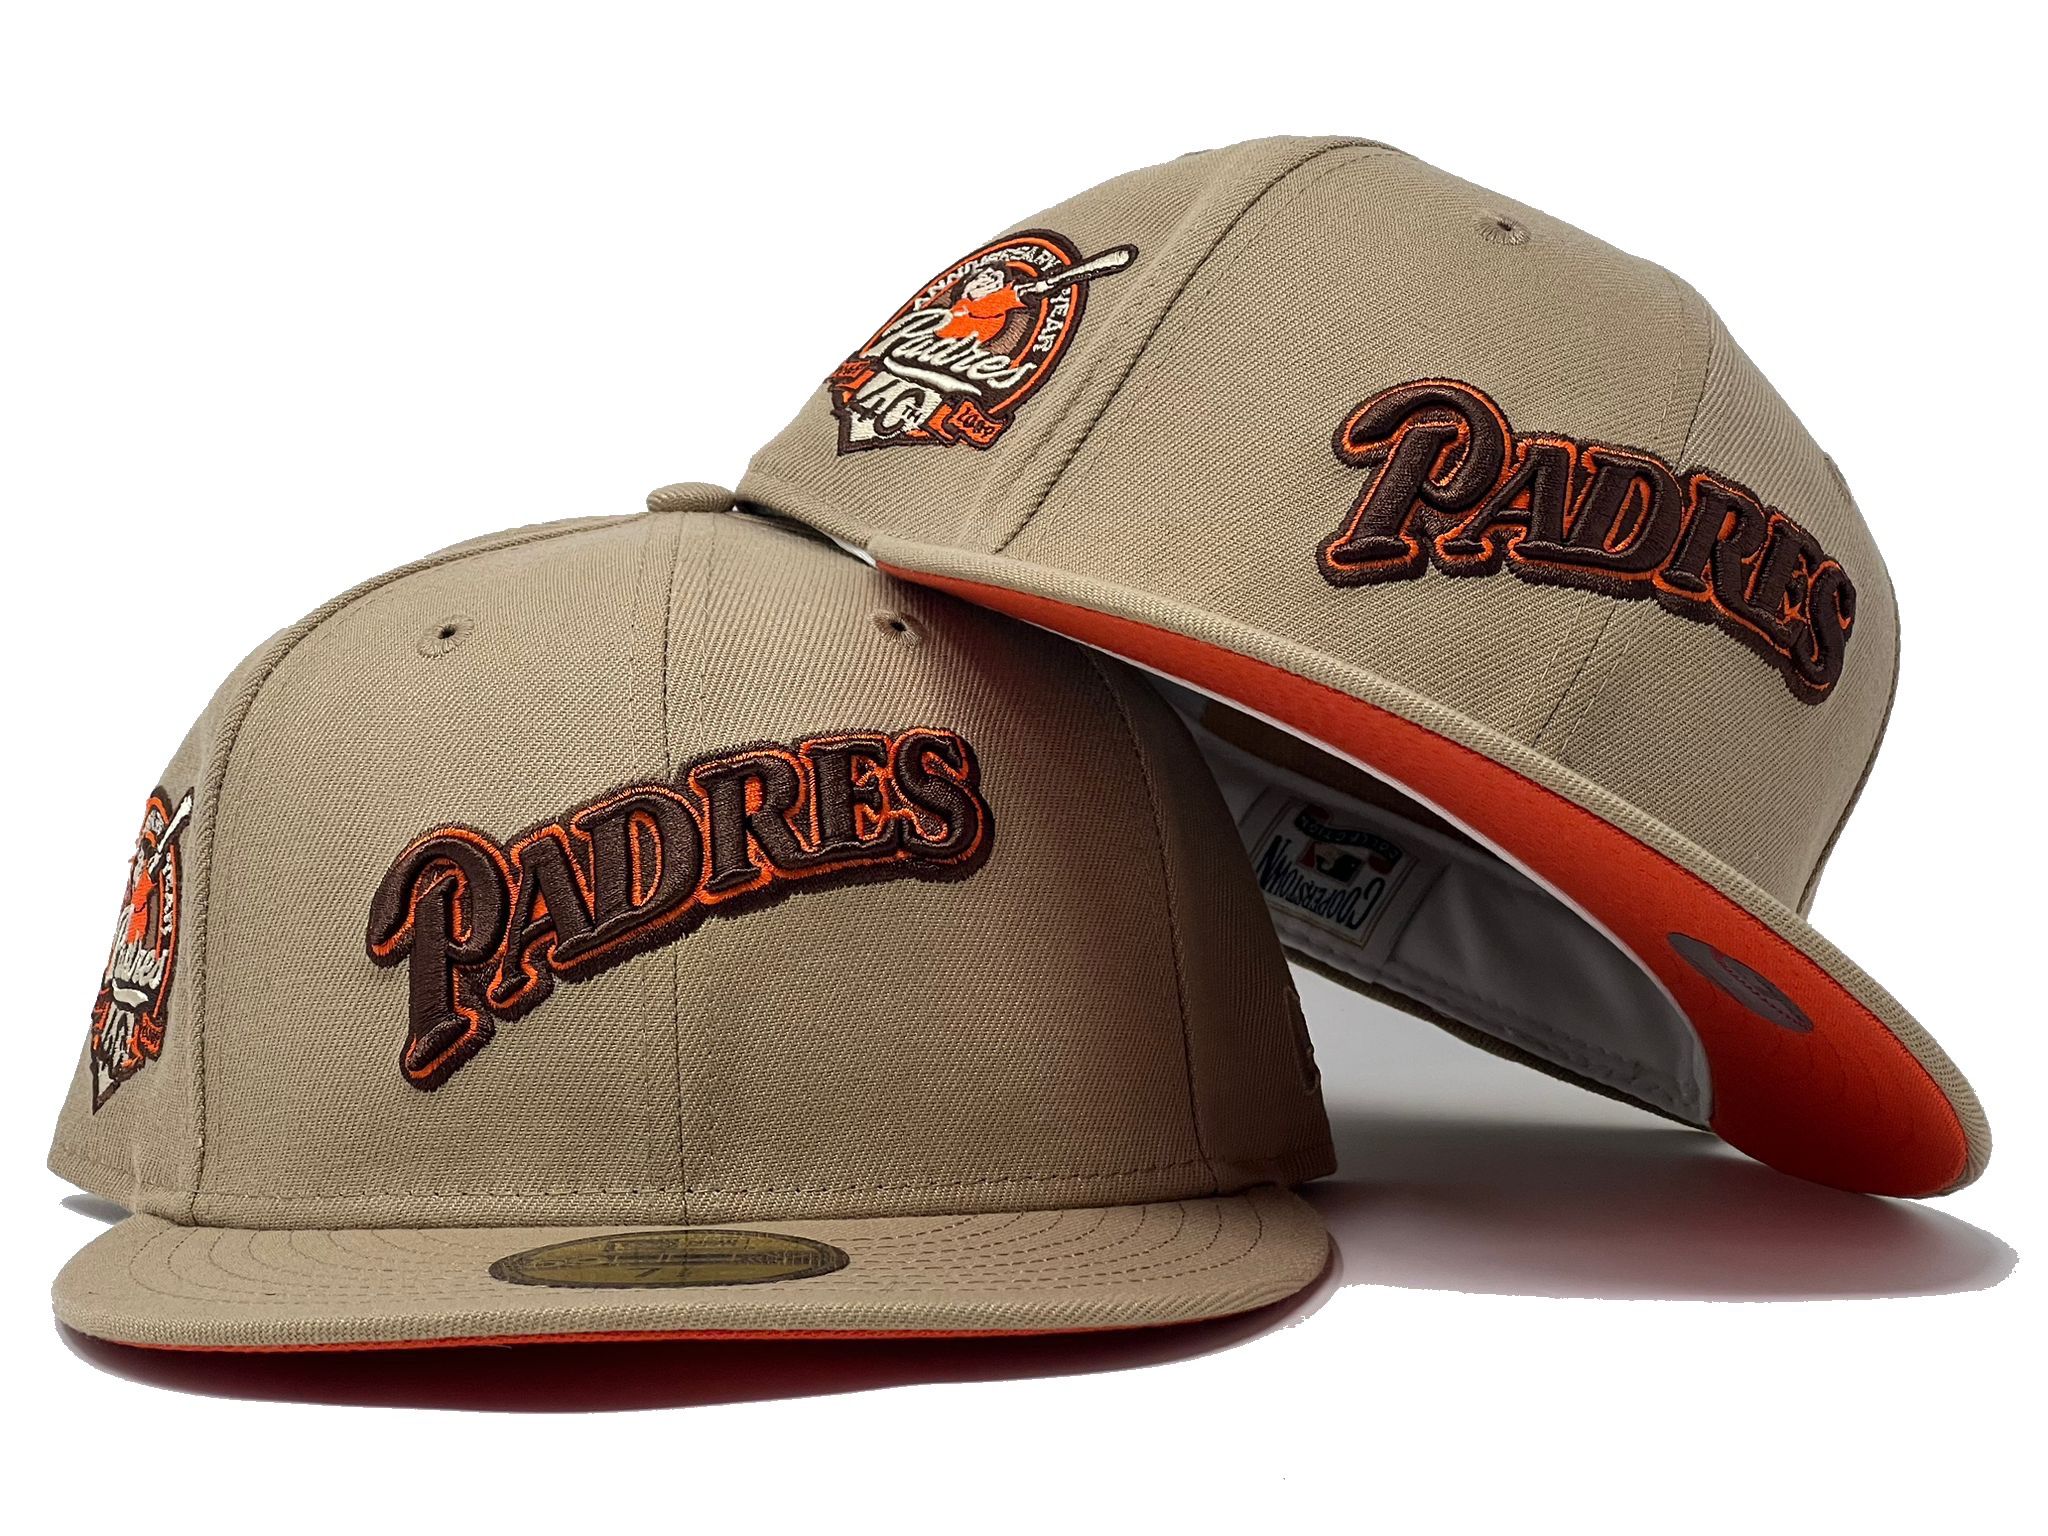 New Era 59FIFTY San Diego Padres Blue/Orange Fitted Hat 8